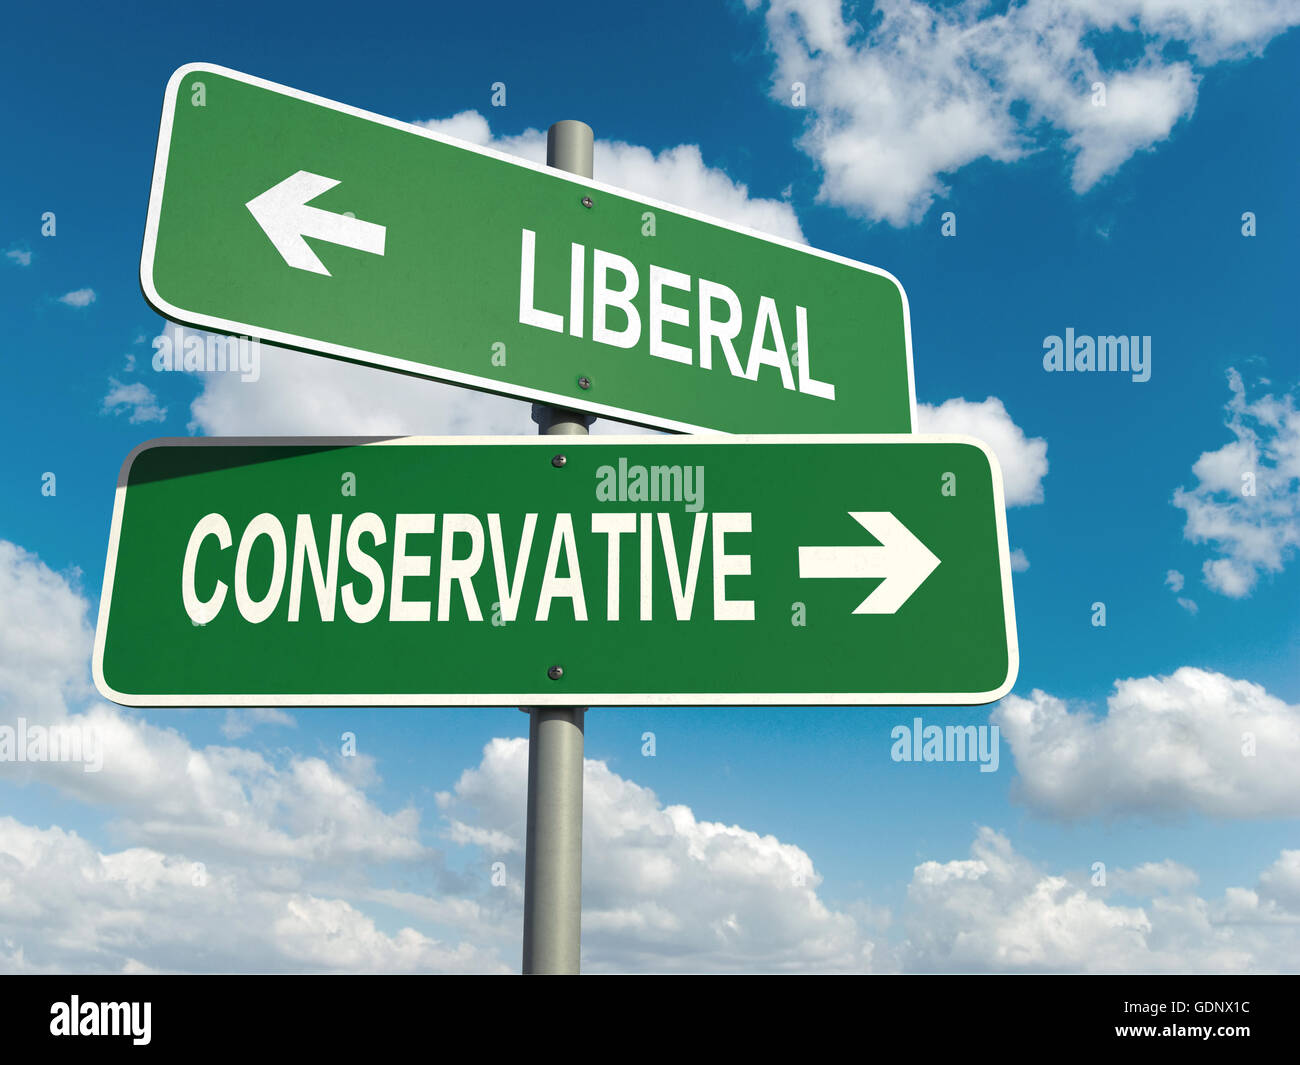 A road sign with liberal conservative words on sky background Stock Photo